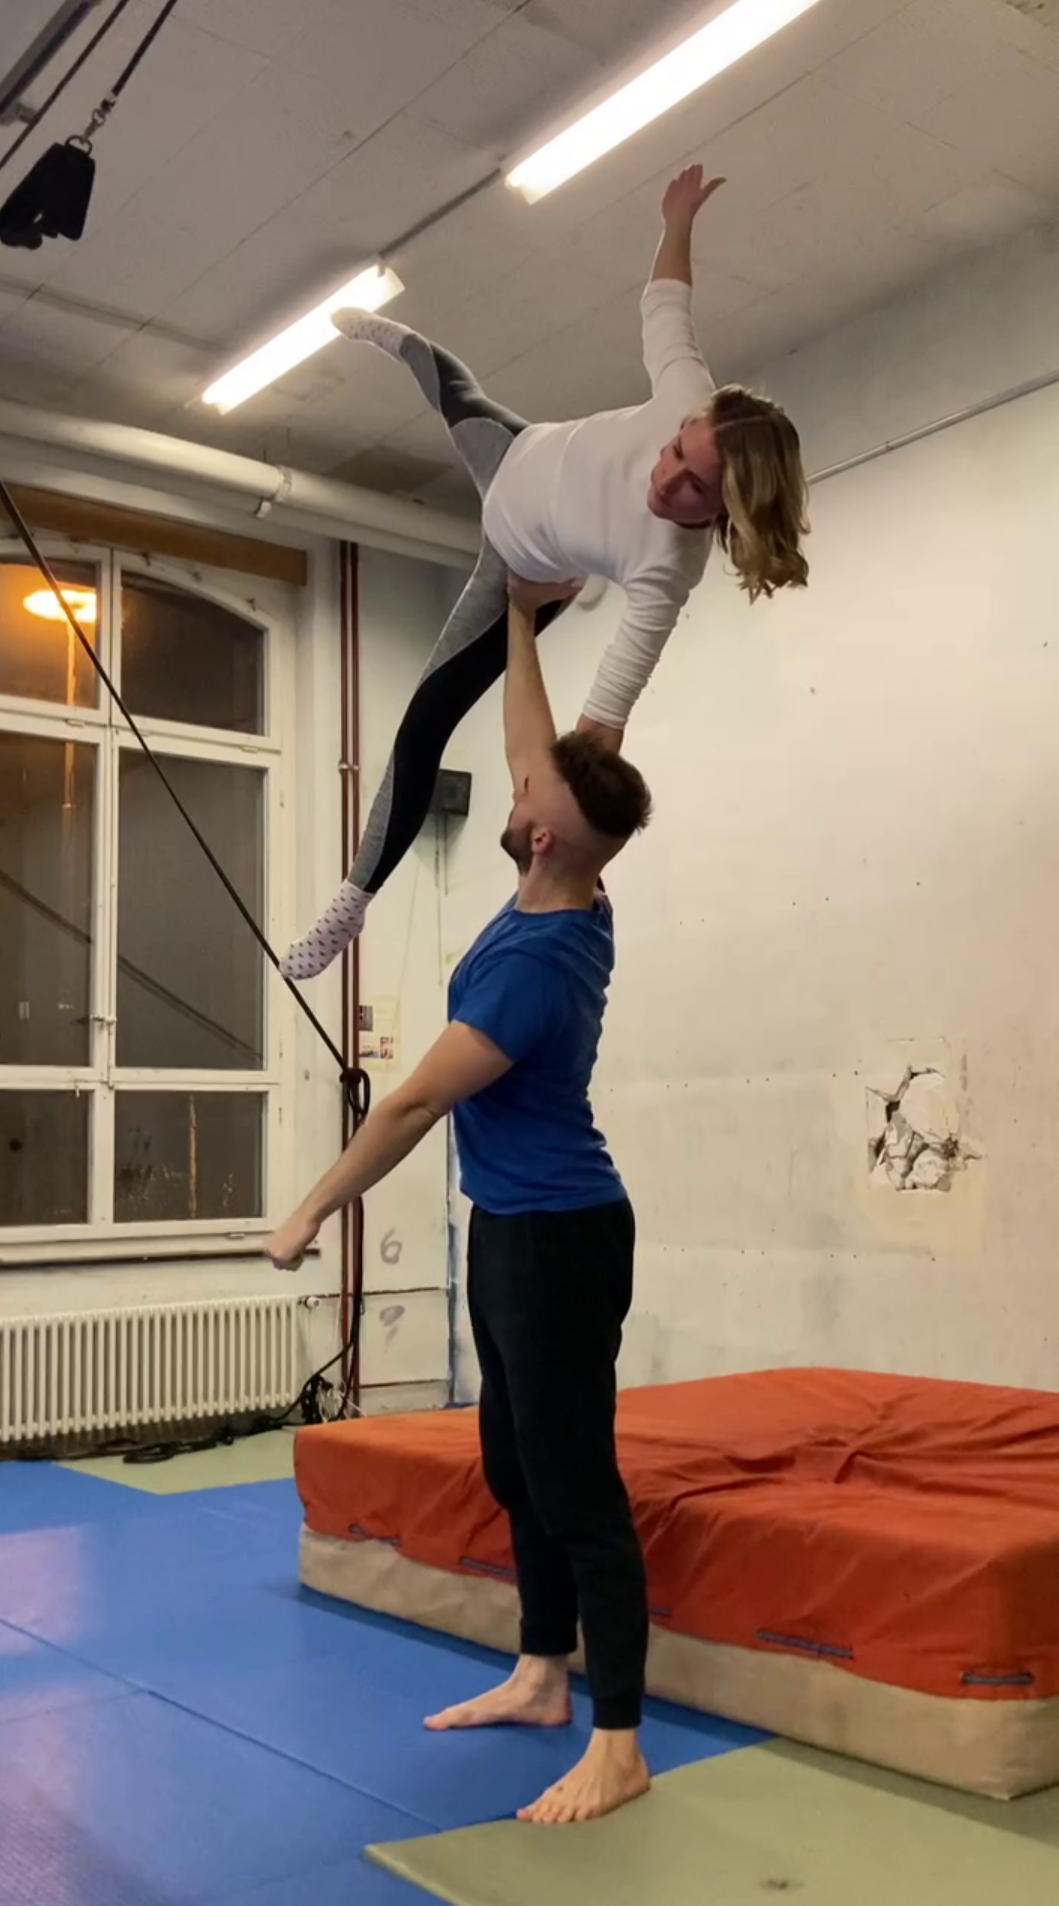 Syd basing a high side-star position in acroyoga